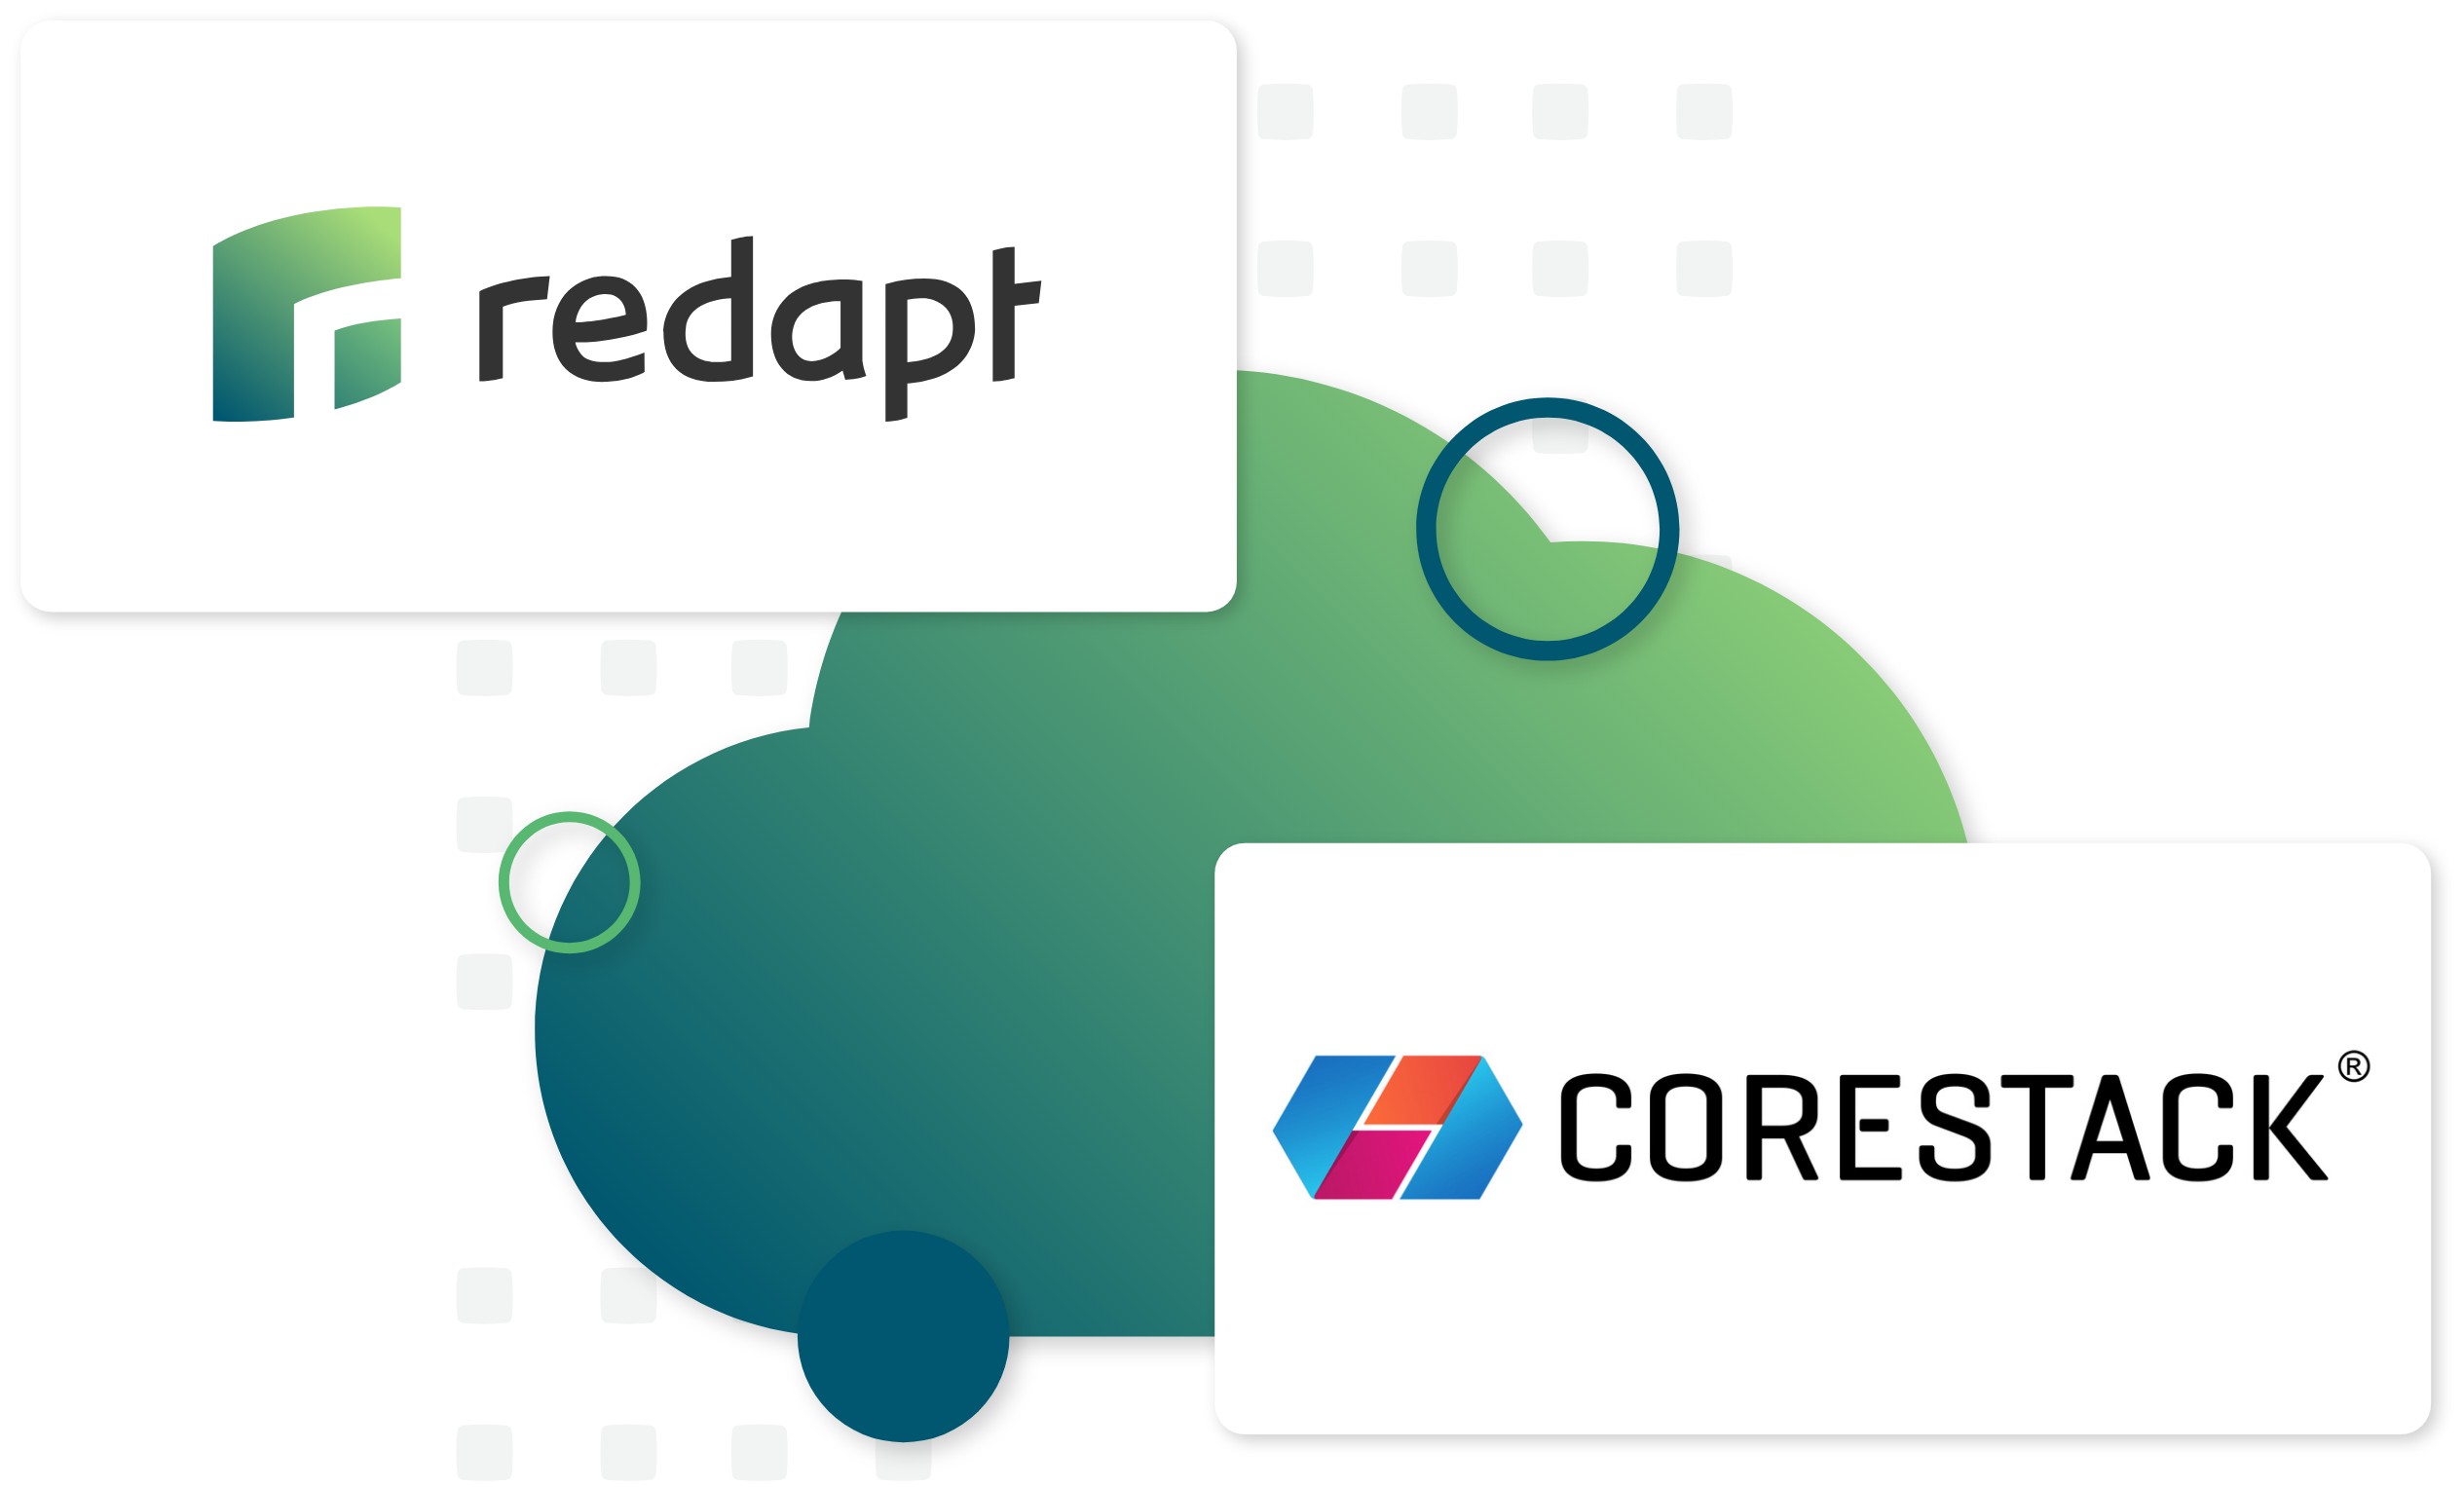 Redapt and CoreStack Announce Technology Partnership to Deliver Cloud Cost Optimization, Compliance, and Governance Solutions